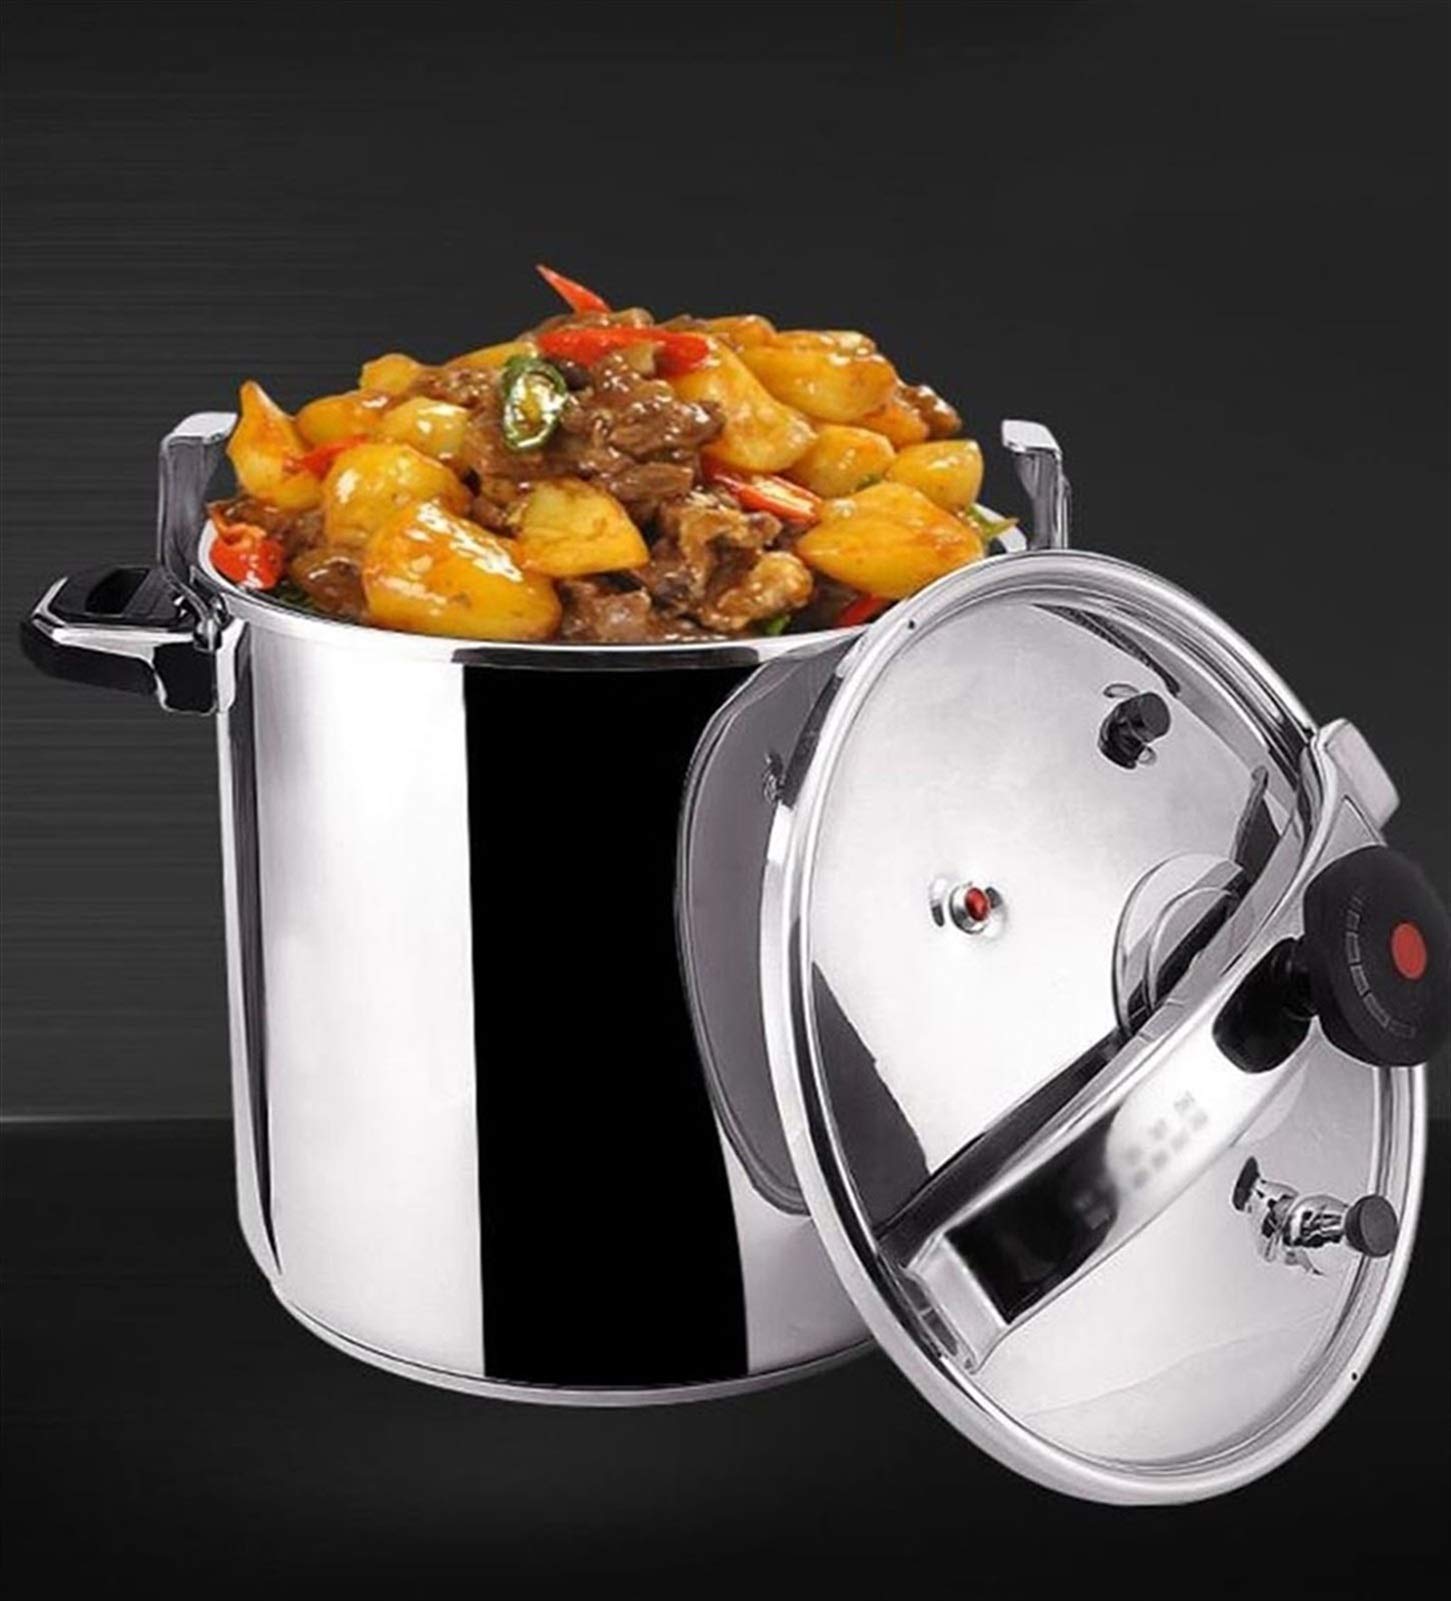 Large Capacity Commercial Stainless Steel Pressure Cooker, Outdoor Explosion-proof Gas Pressure Cooker Slow Cook Pot, High Pressure Cooker No Pick ...